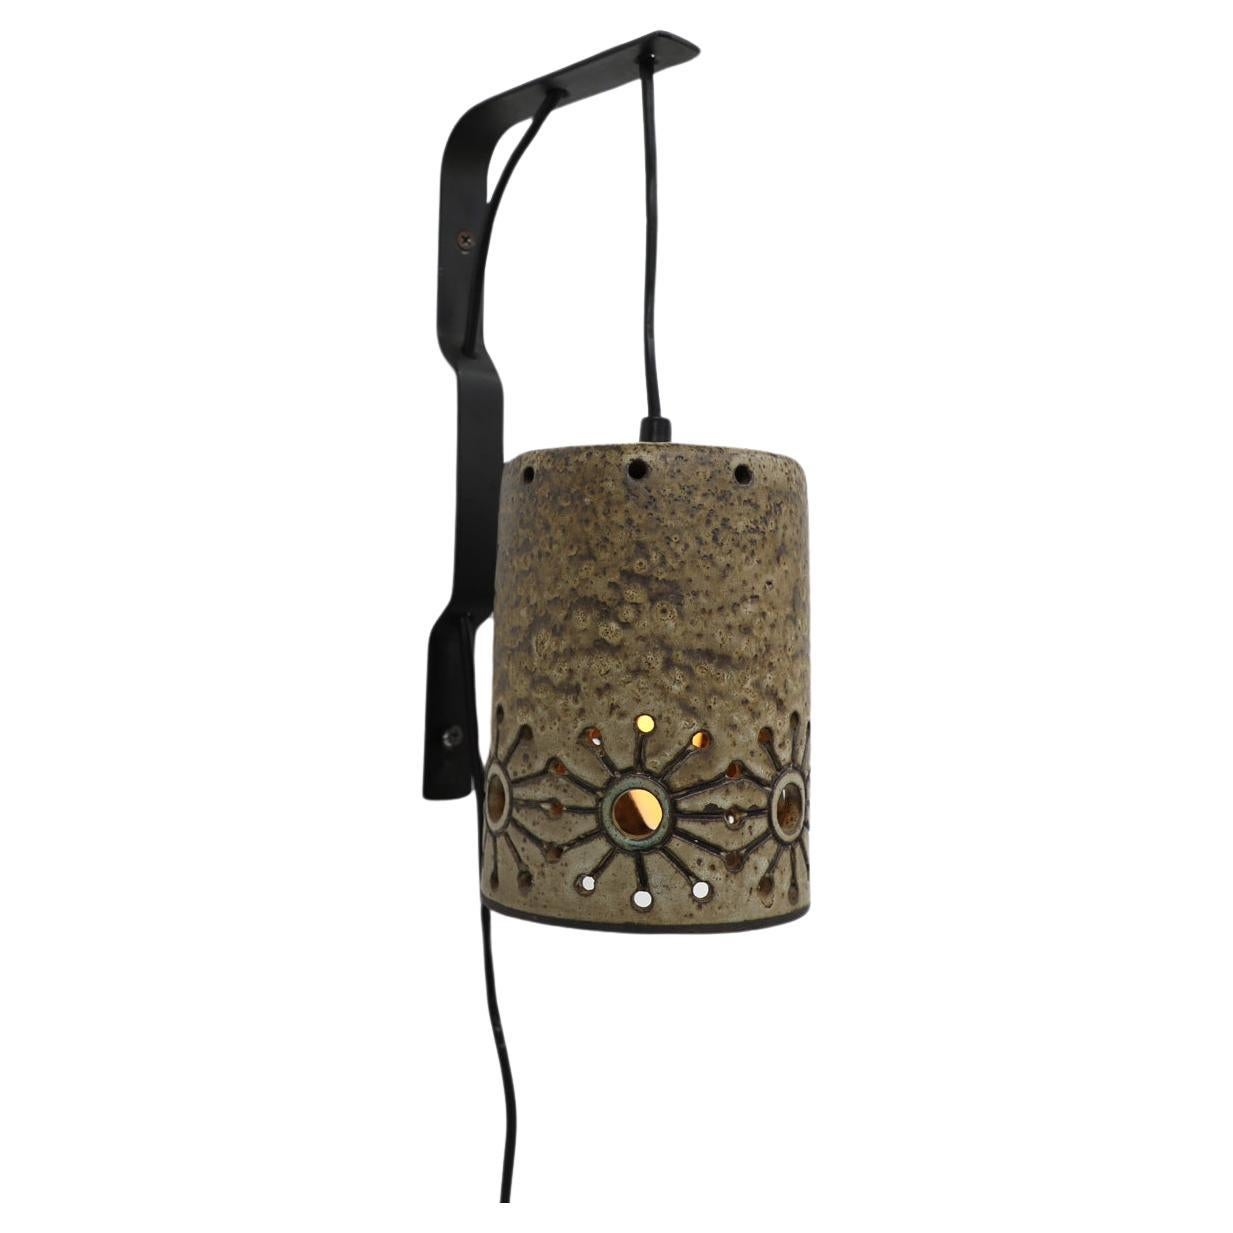 Hannie Mein Sunflower Ceramic Wall Sconce For Sale